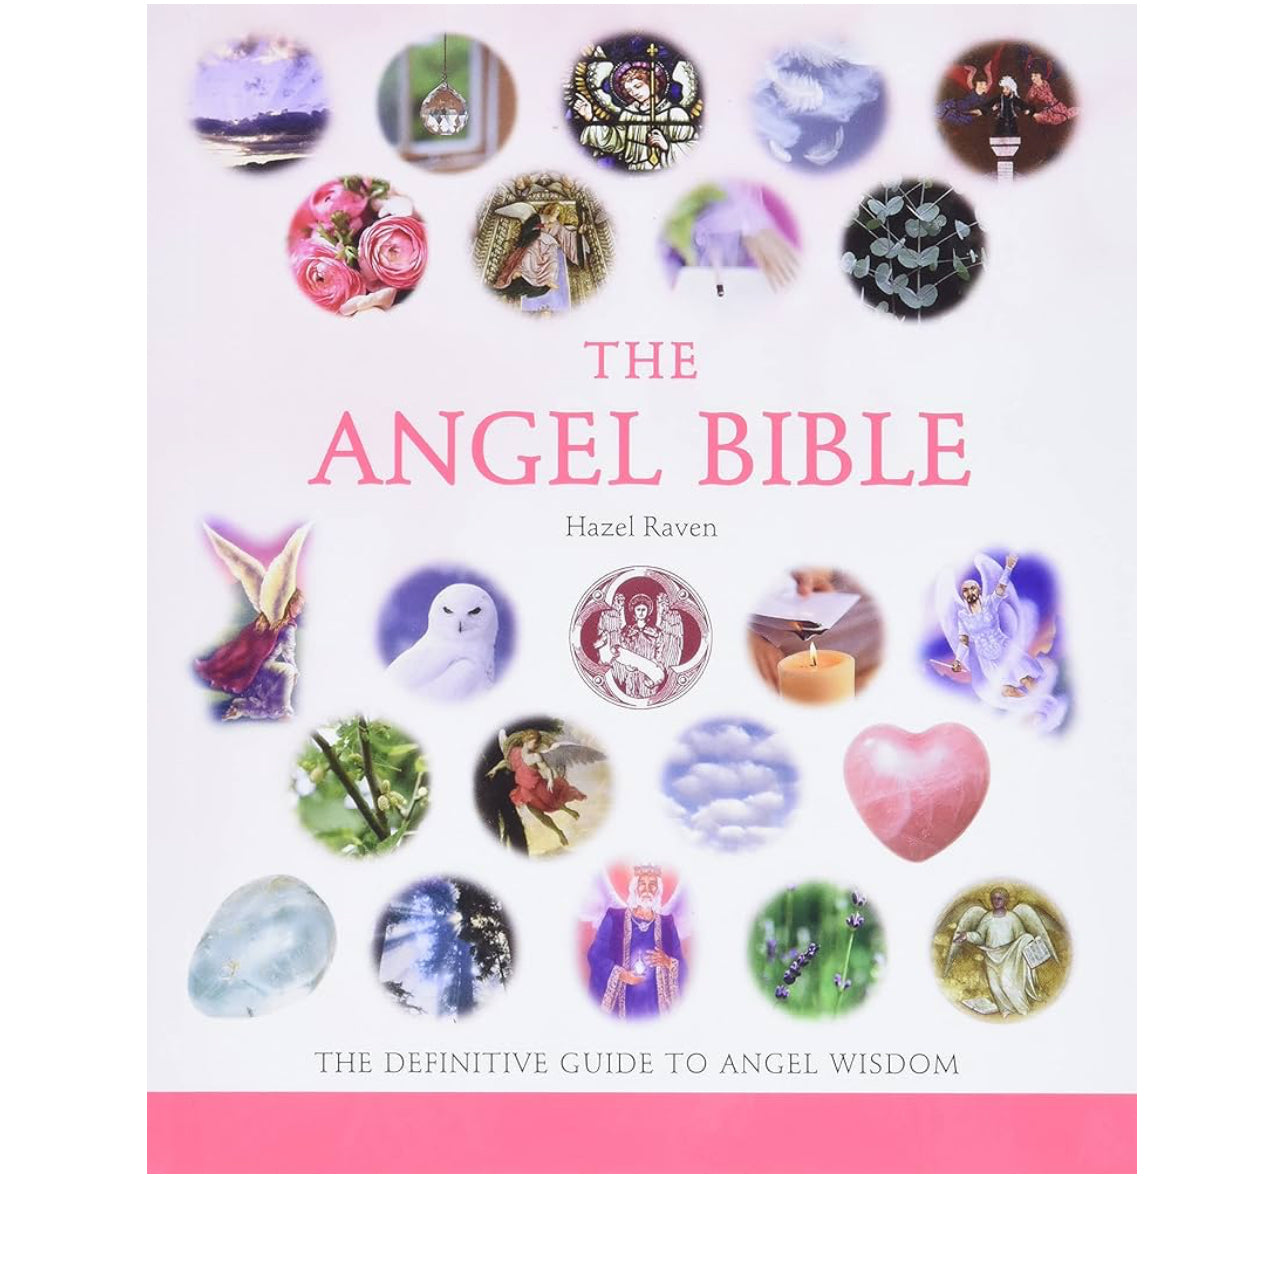 The Angel Bible: The Definitive Guide to Angel Wisdom (Volume 8) (Mind Body Spirit Bibles)